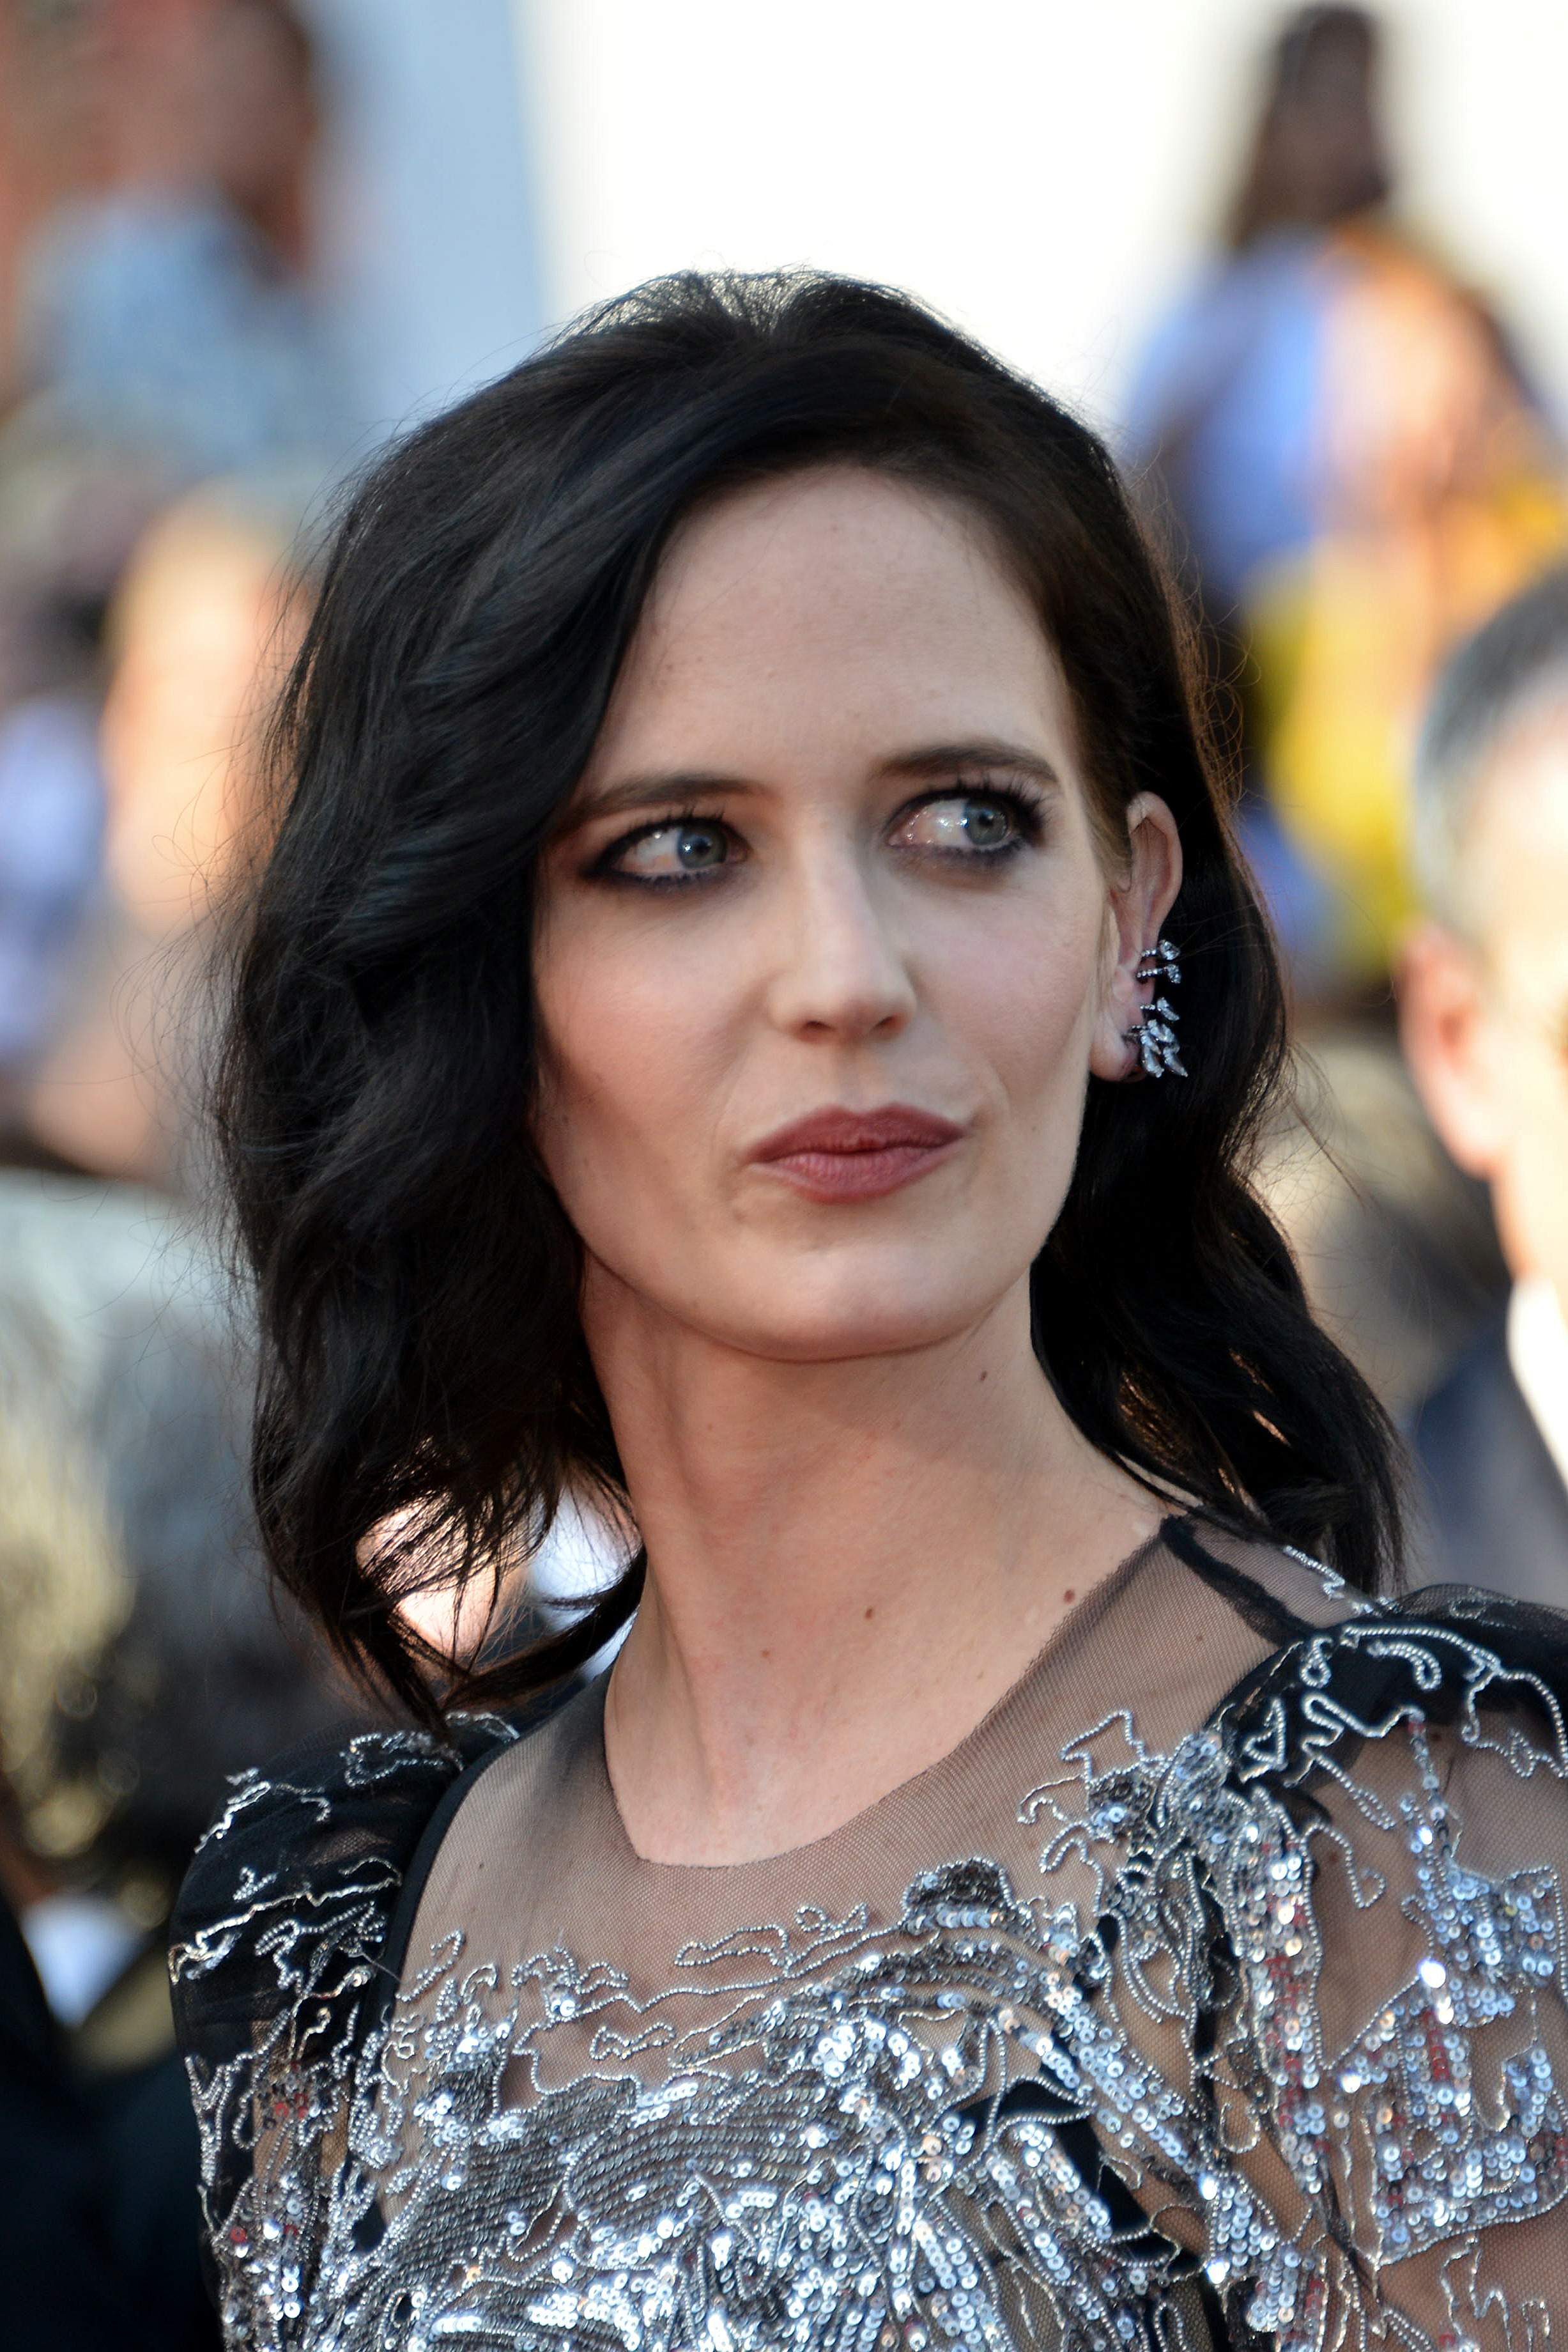 Eva Green Is Looking Fine These Days #79531506